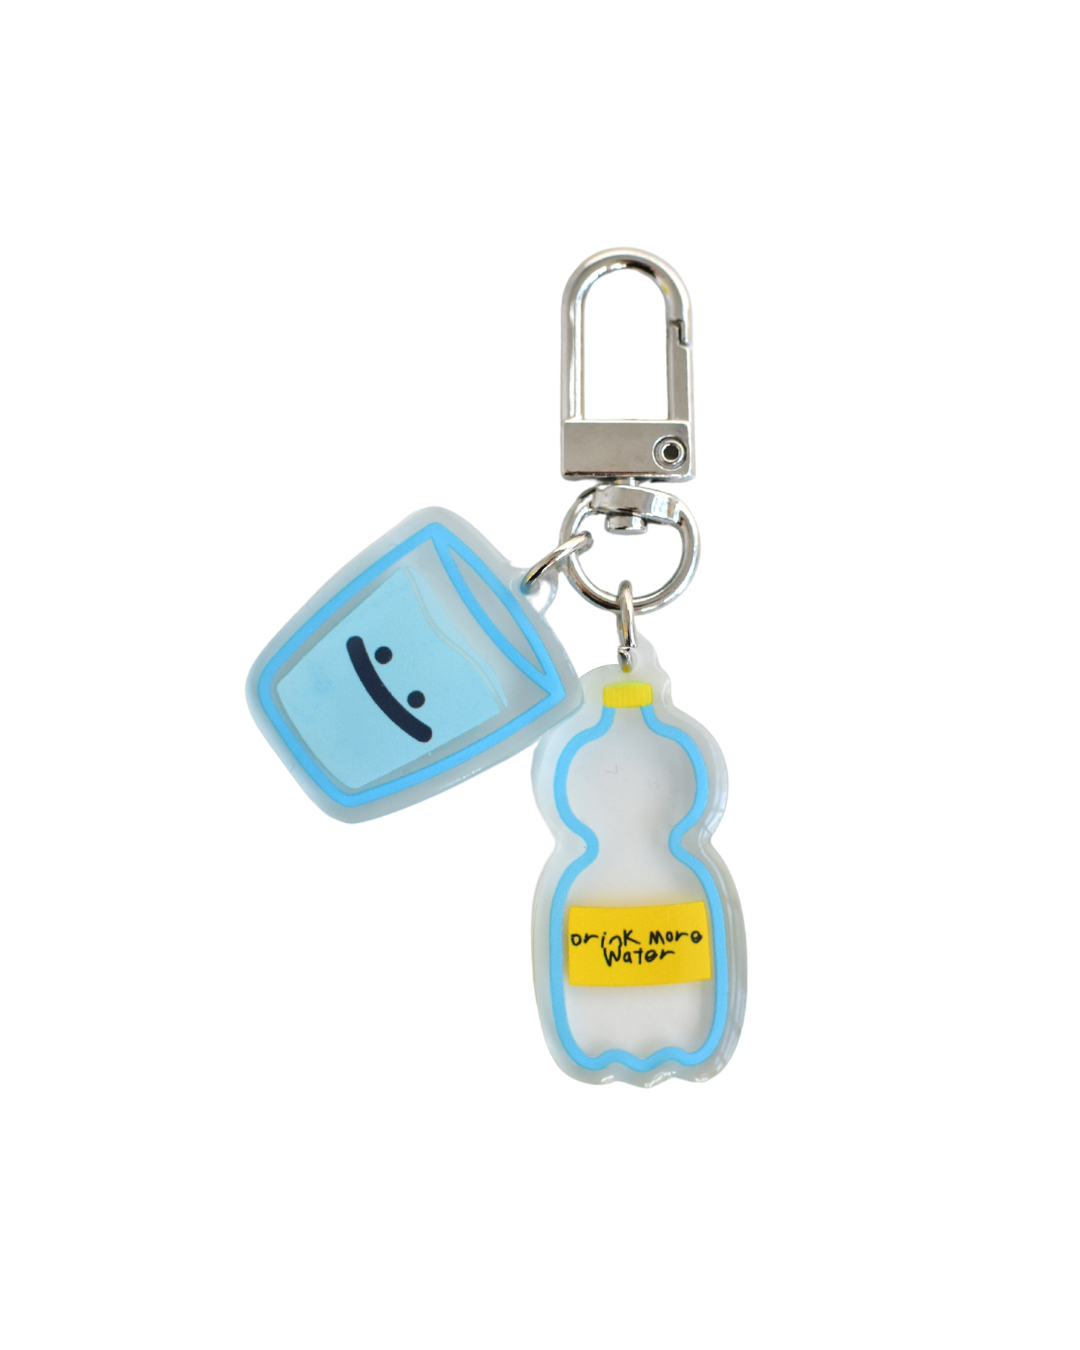 Drink More Water Keychain